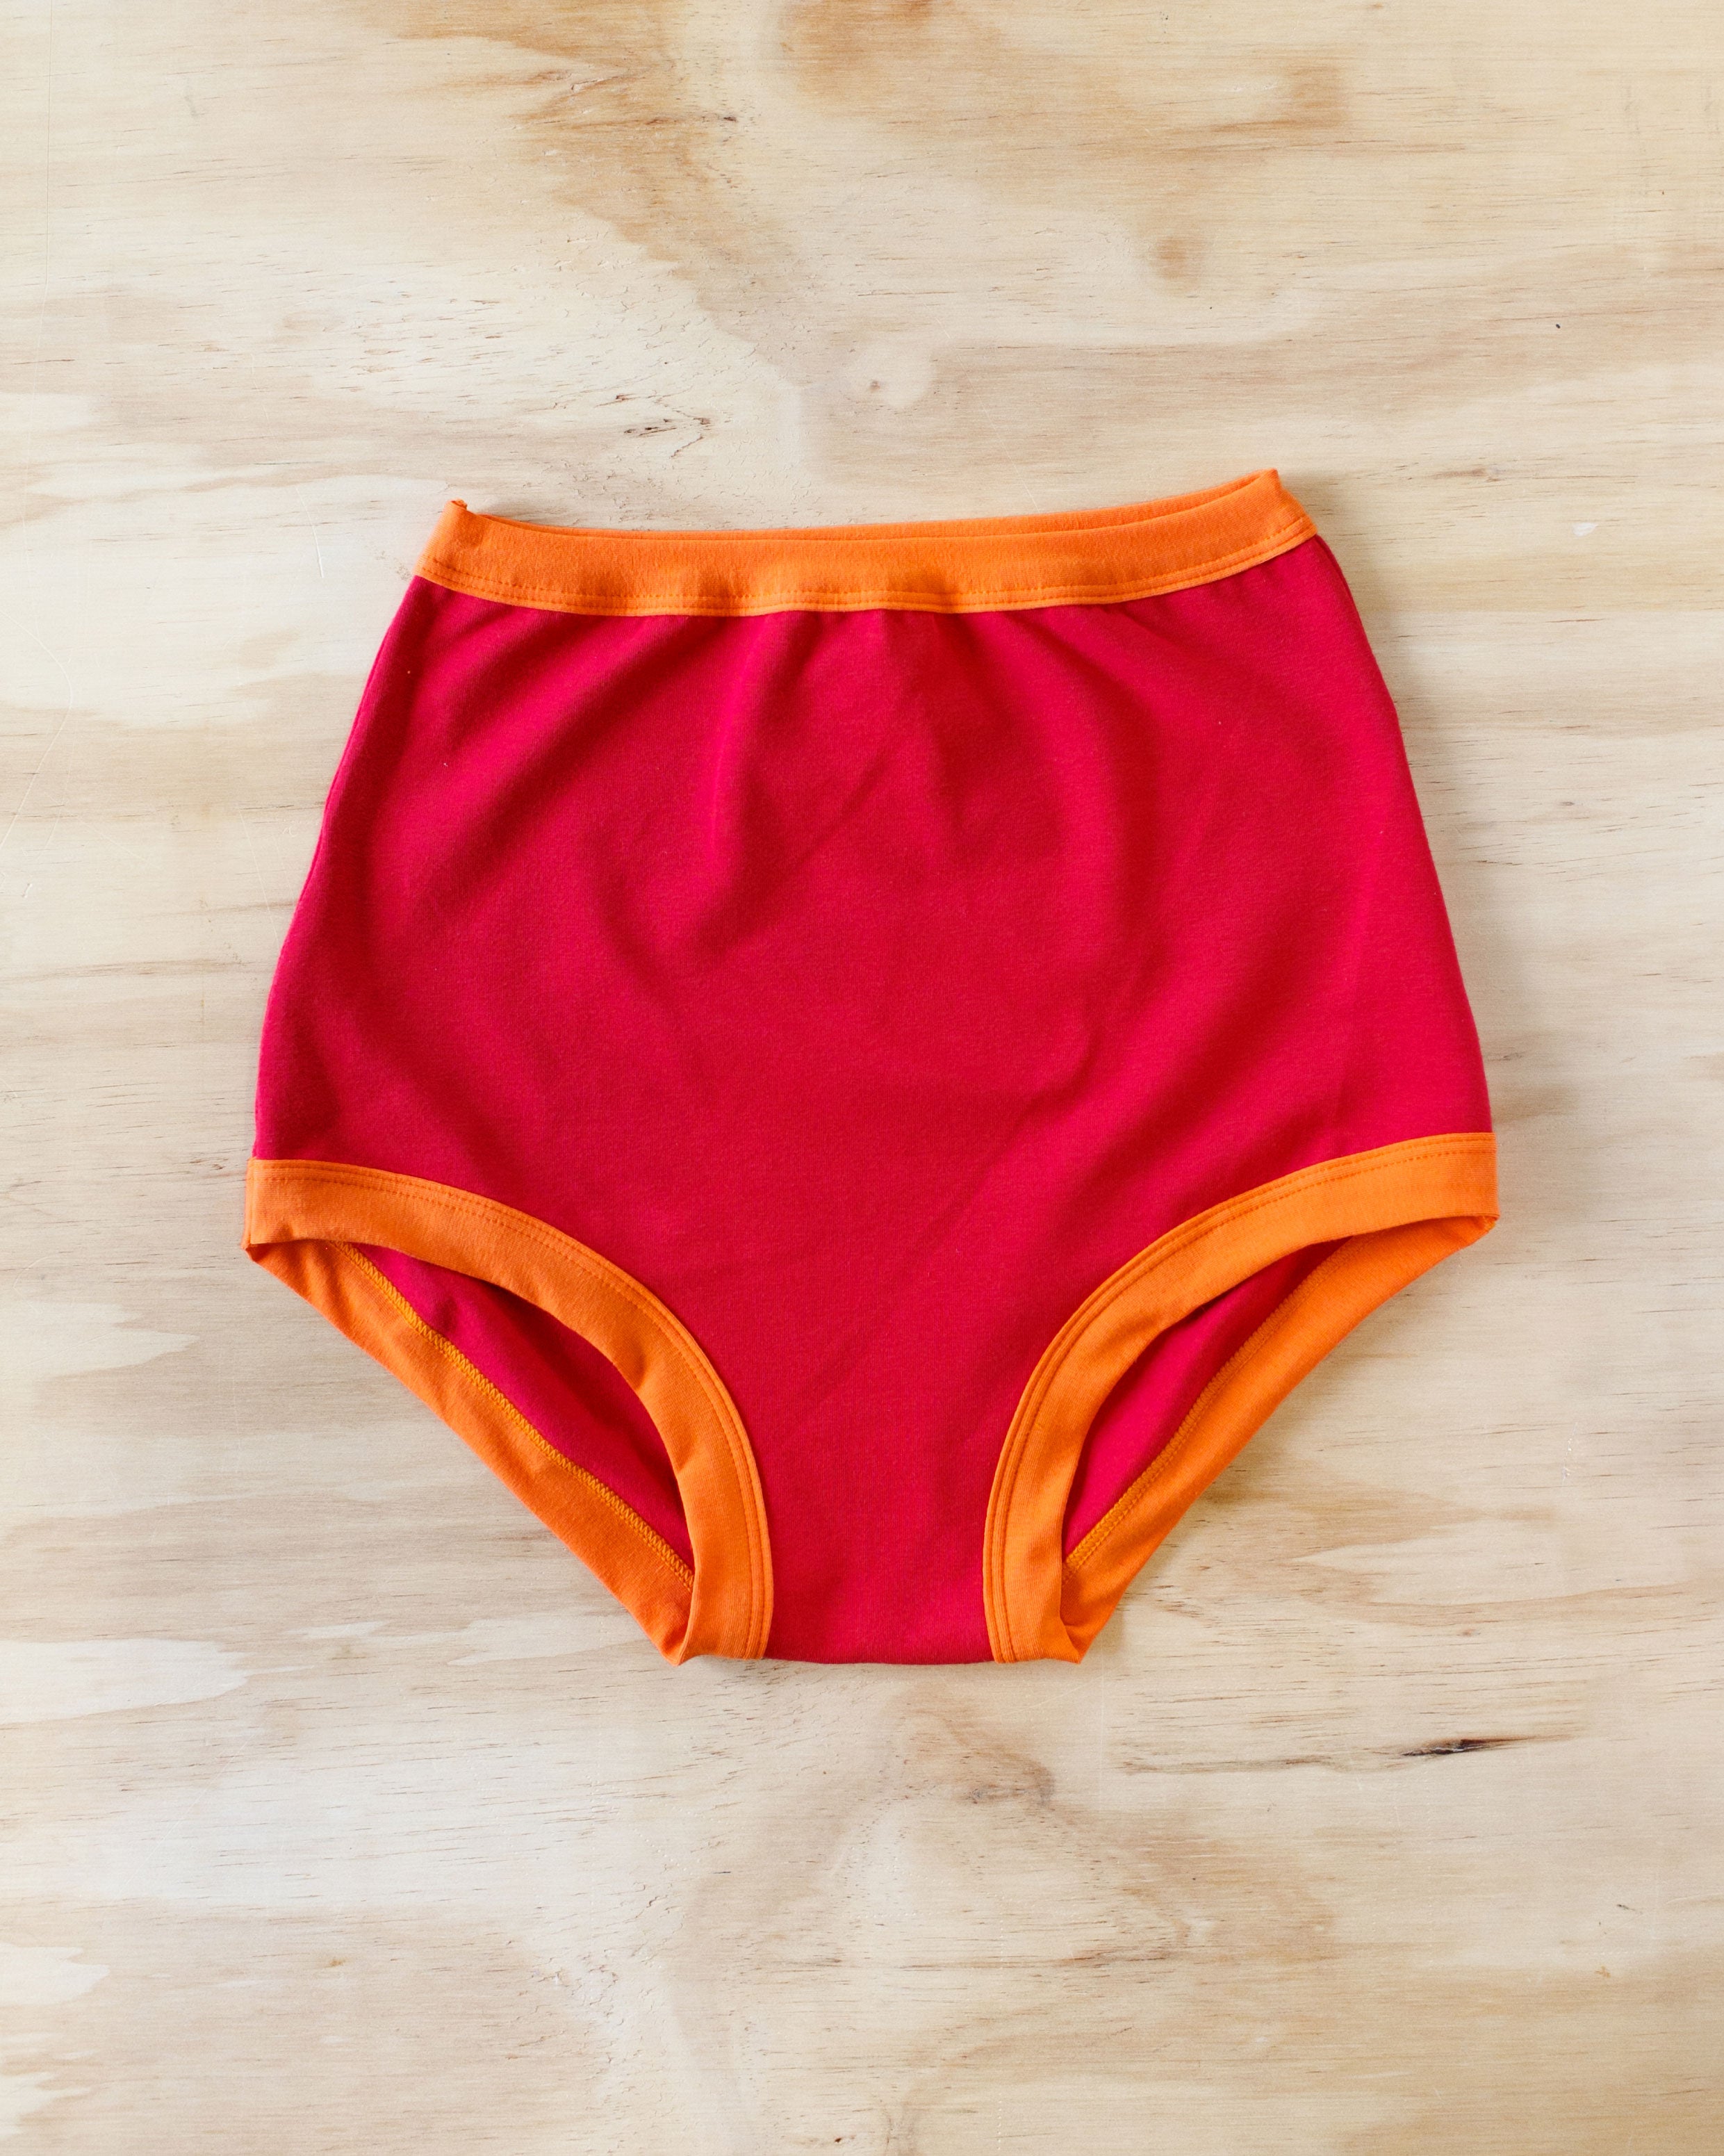 Flat lay on wood surface of Sky Rise style Pants on Fire: red with orange binding.